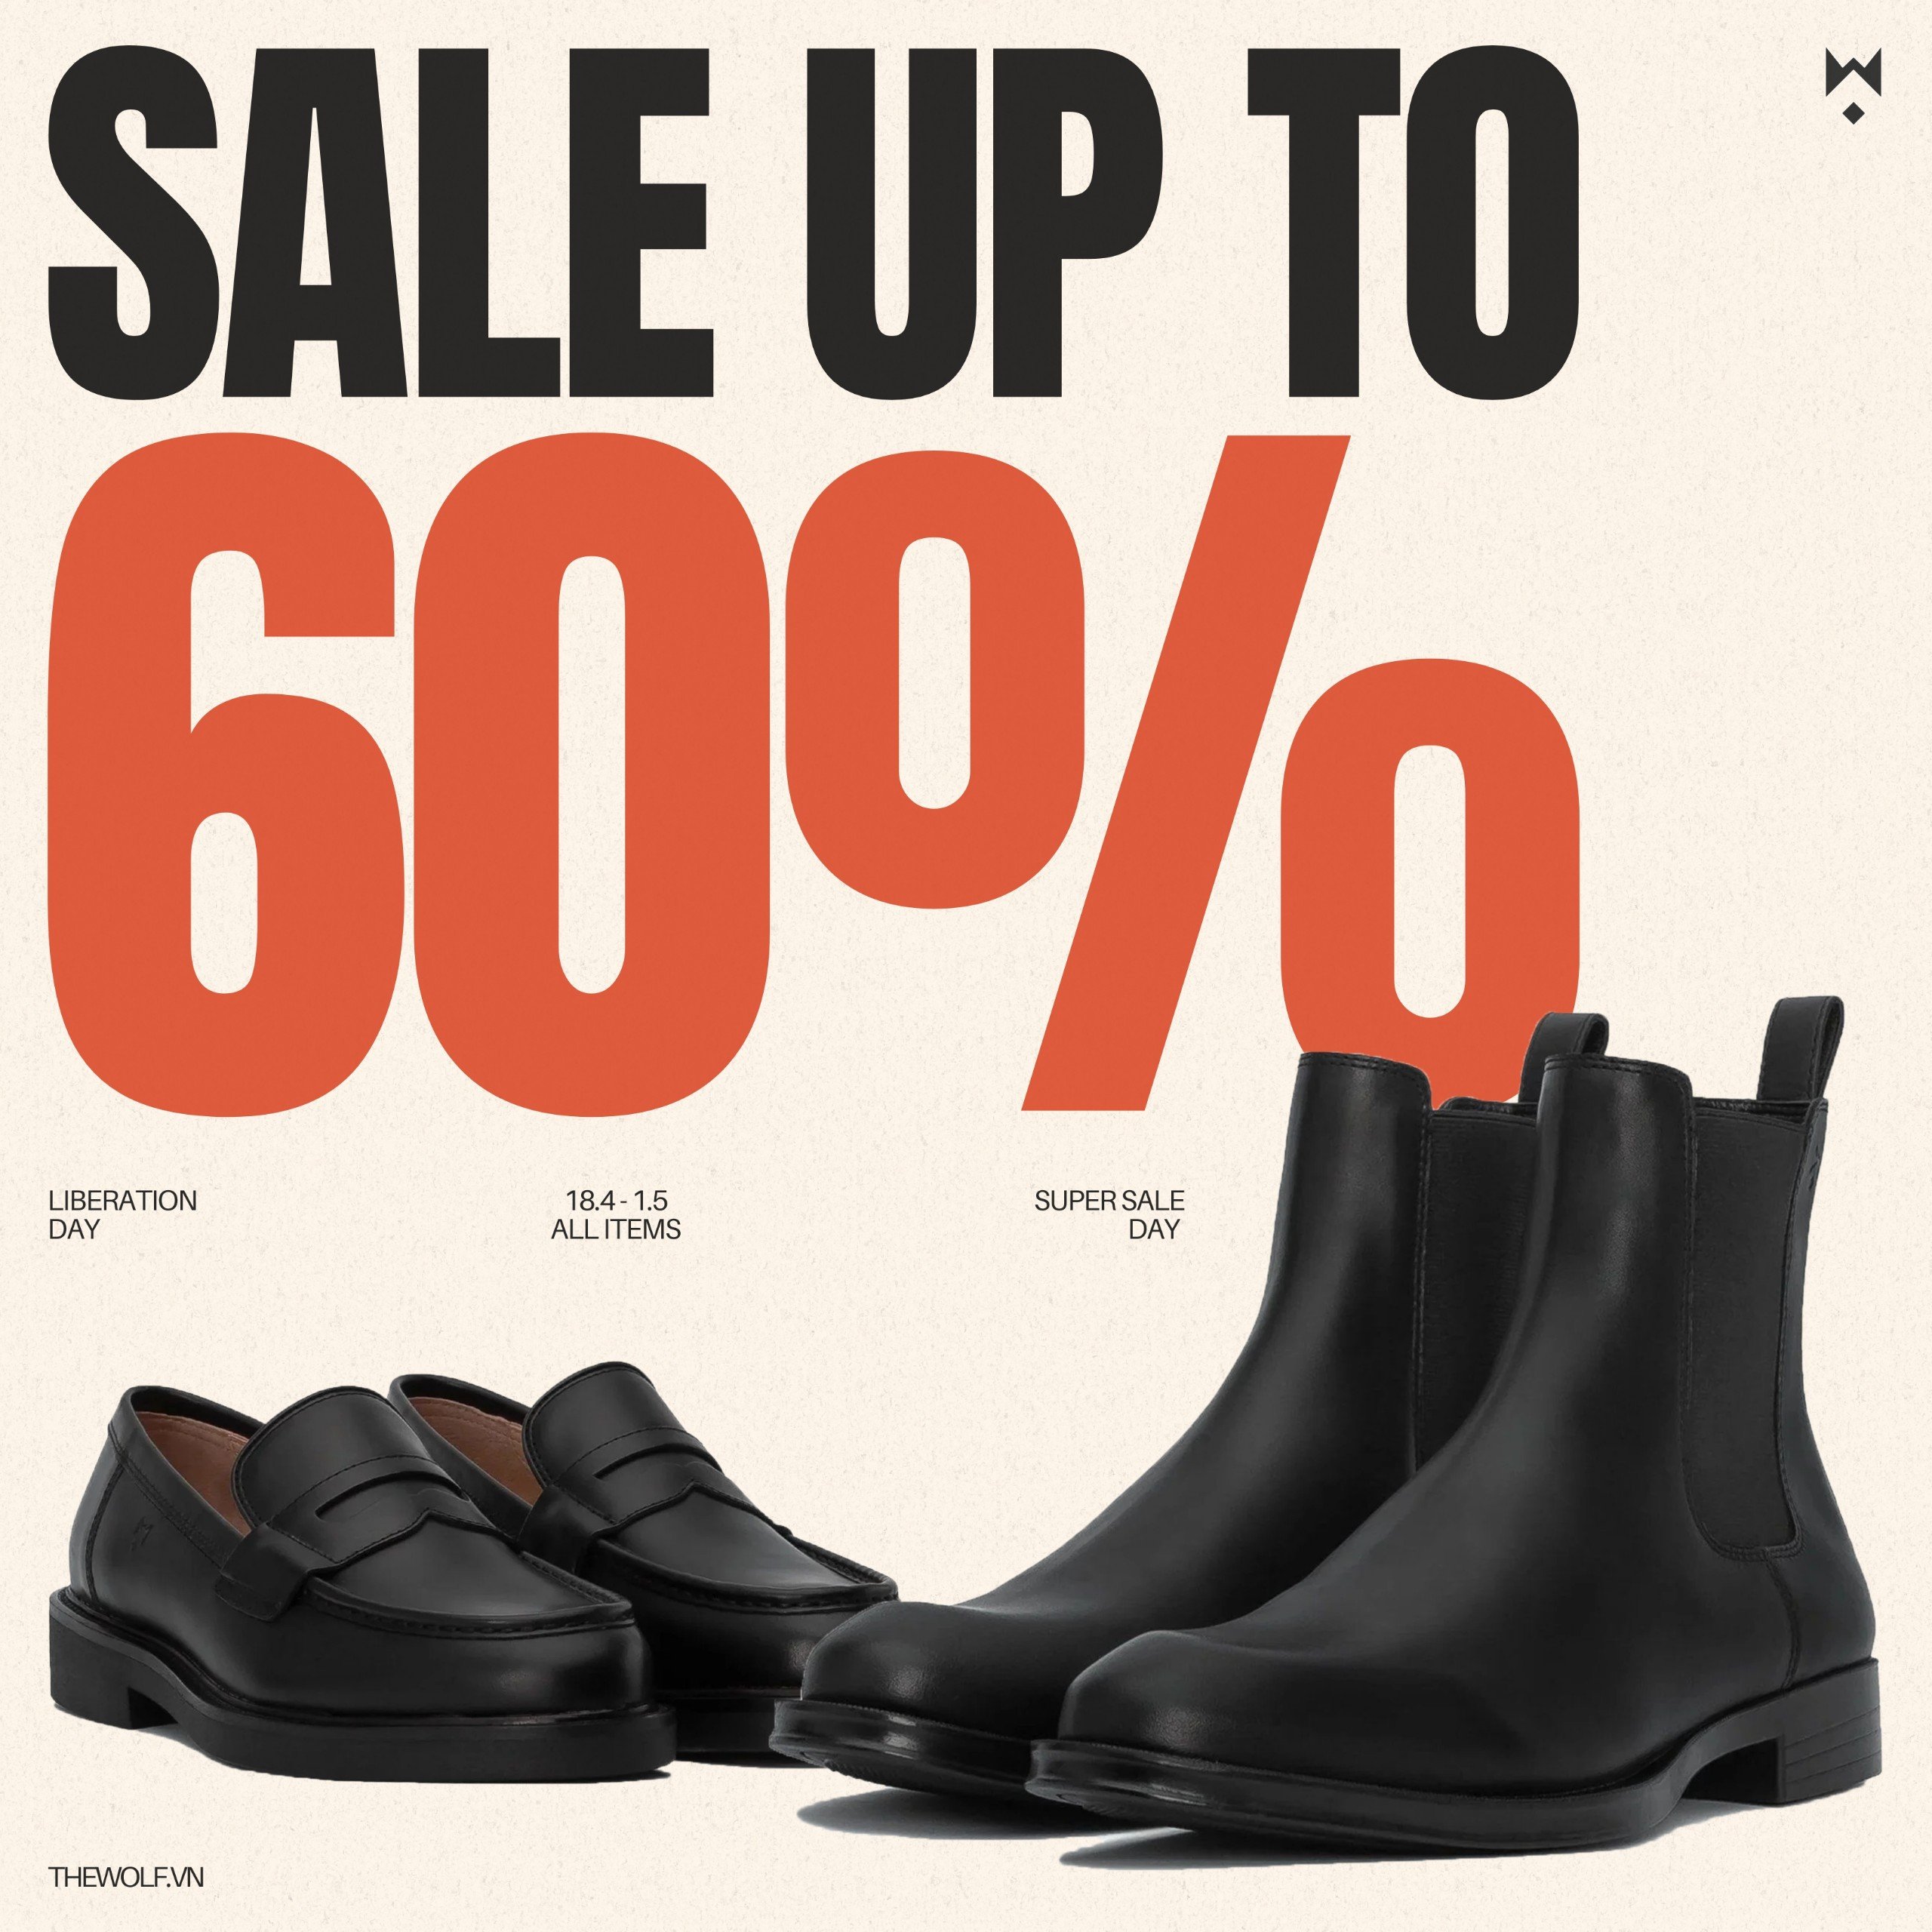 SALE UP TO 60%